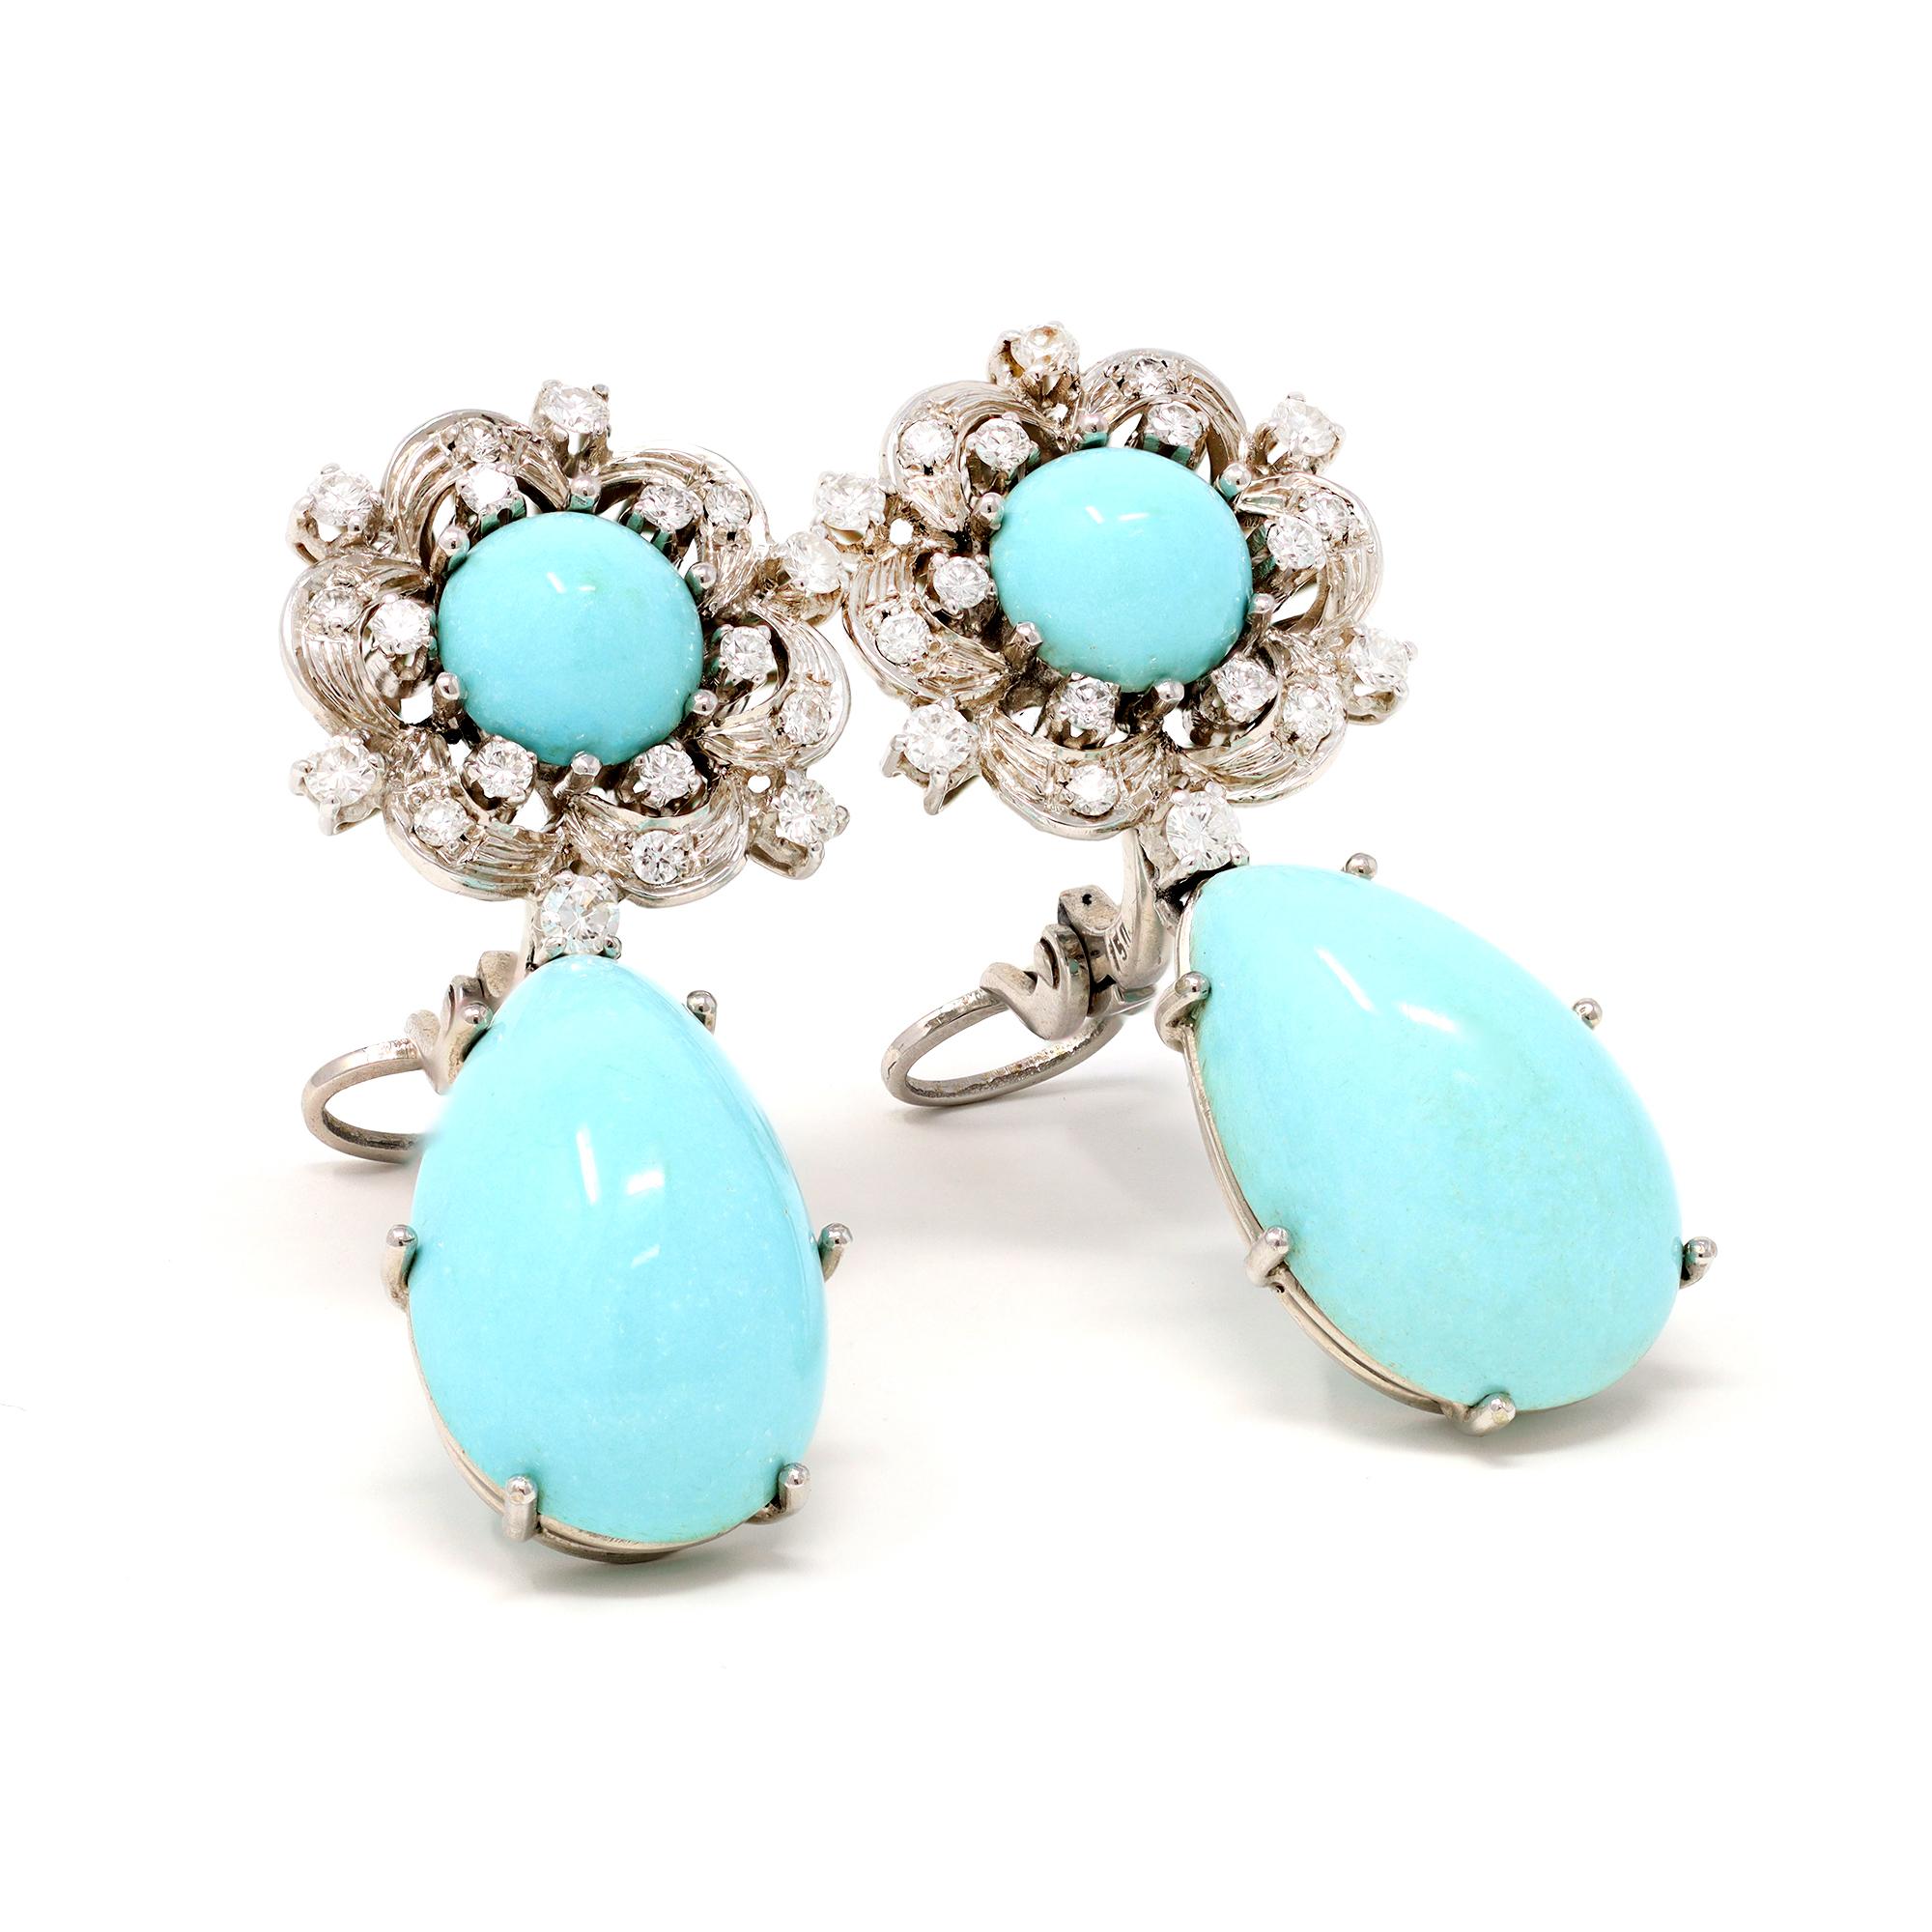 A pair of natural untreated turquoise and diamond pendant clip-on earrings, Circa 1950.  This classic design is set in 18 karat white gold, featuiring a matched in color drop shape turquoise pendants and round cabochon turquoise studs adorned with